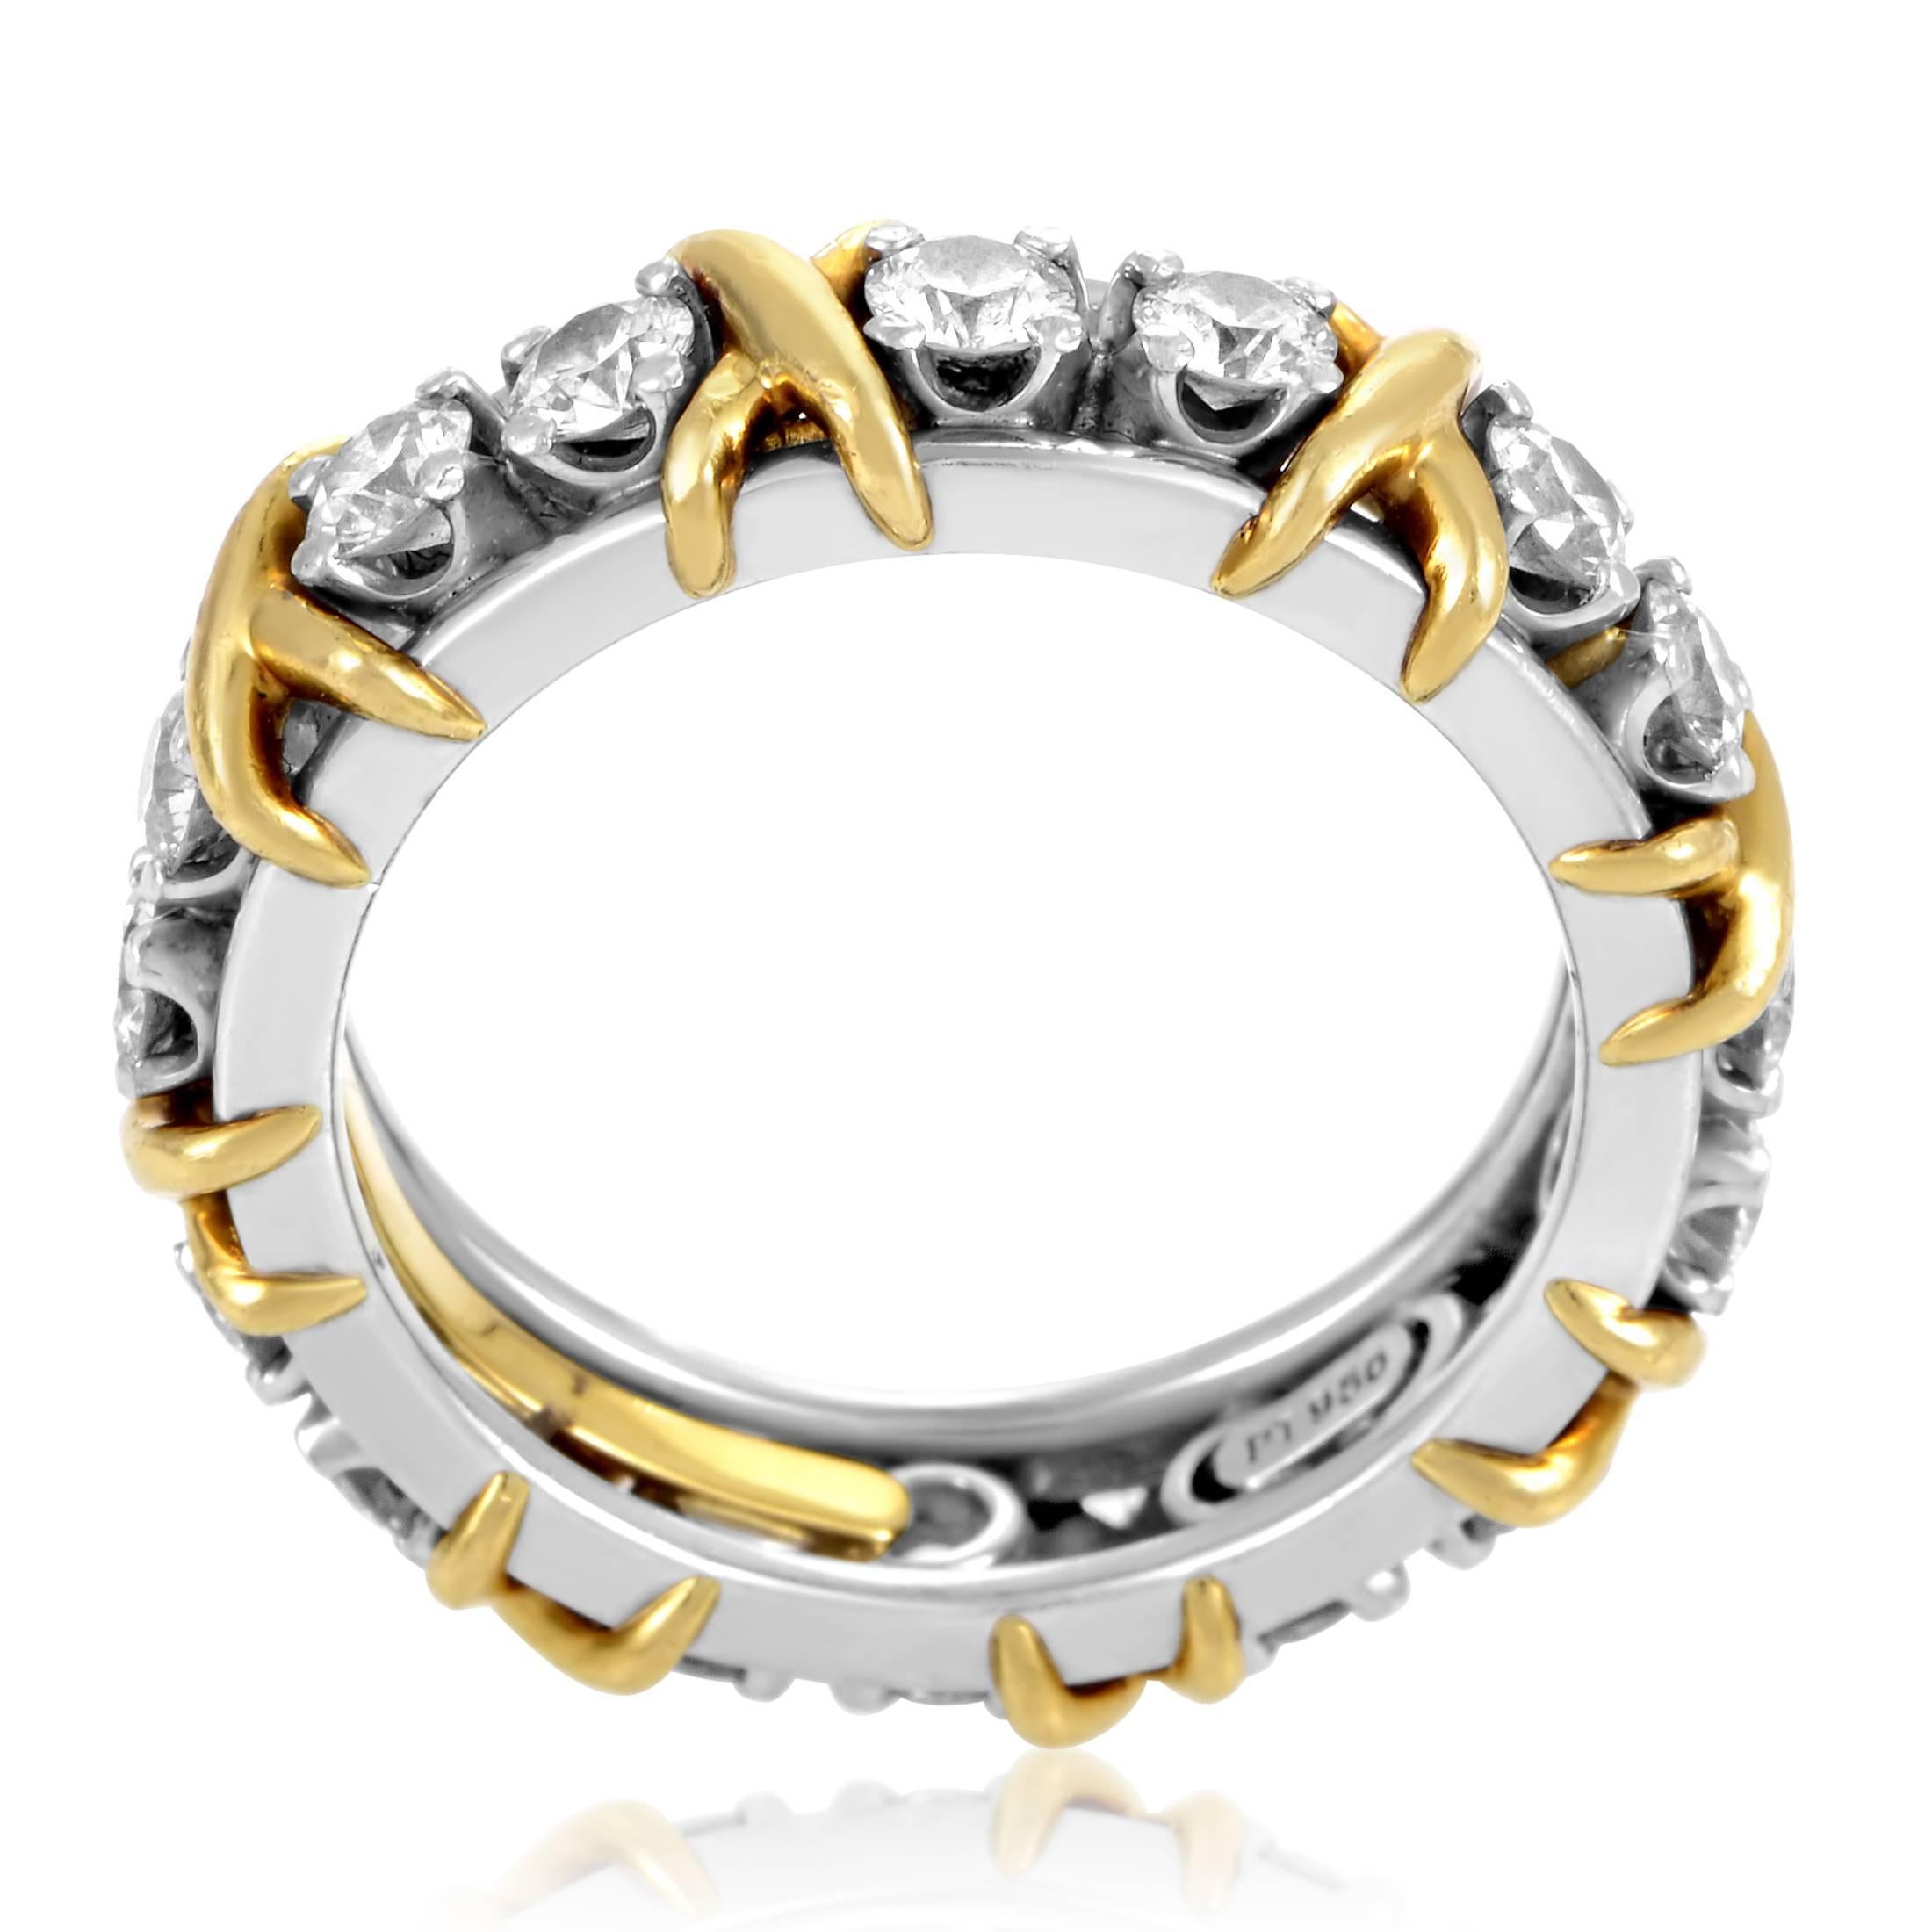 Tastefully interspersed with intriguing 18K yellow gold segments which break the harmonious bright tone, lustrous diamonds weighing in total 1.14 carats are placed upon precious platinum in this fascinating band designed by Jean Schlumberger for